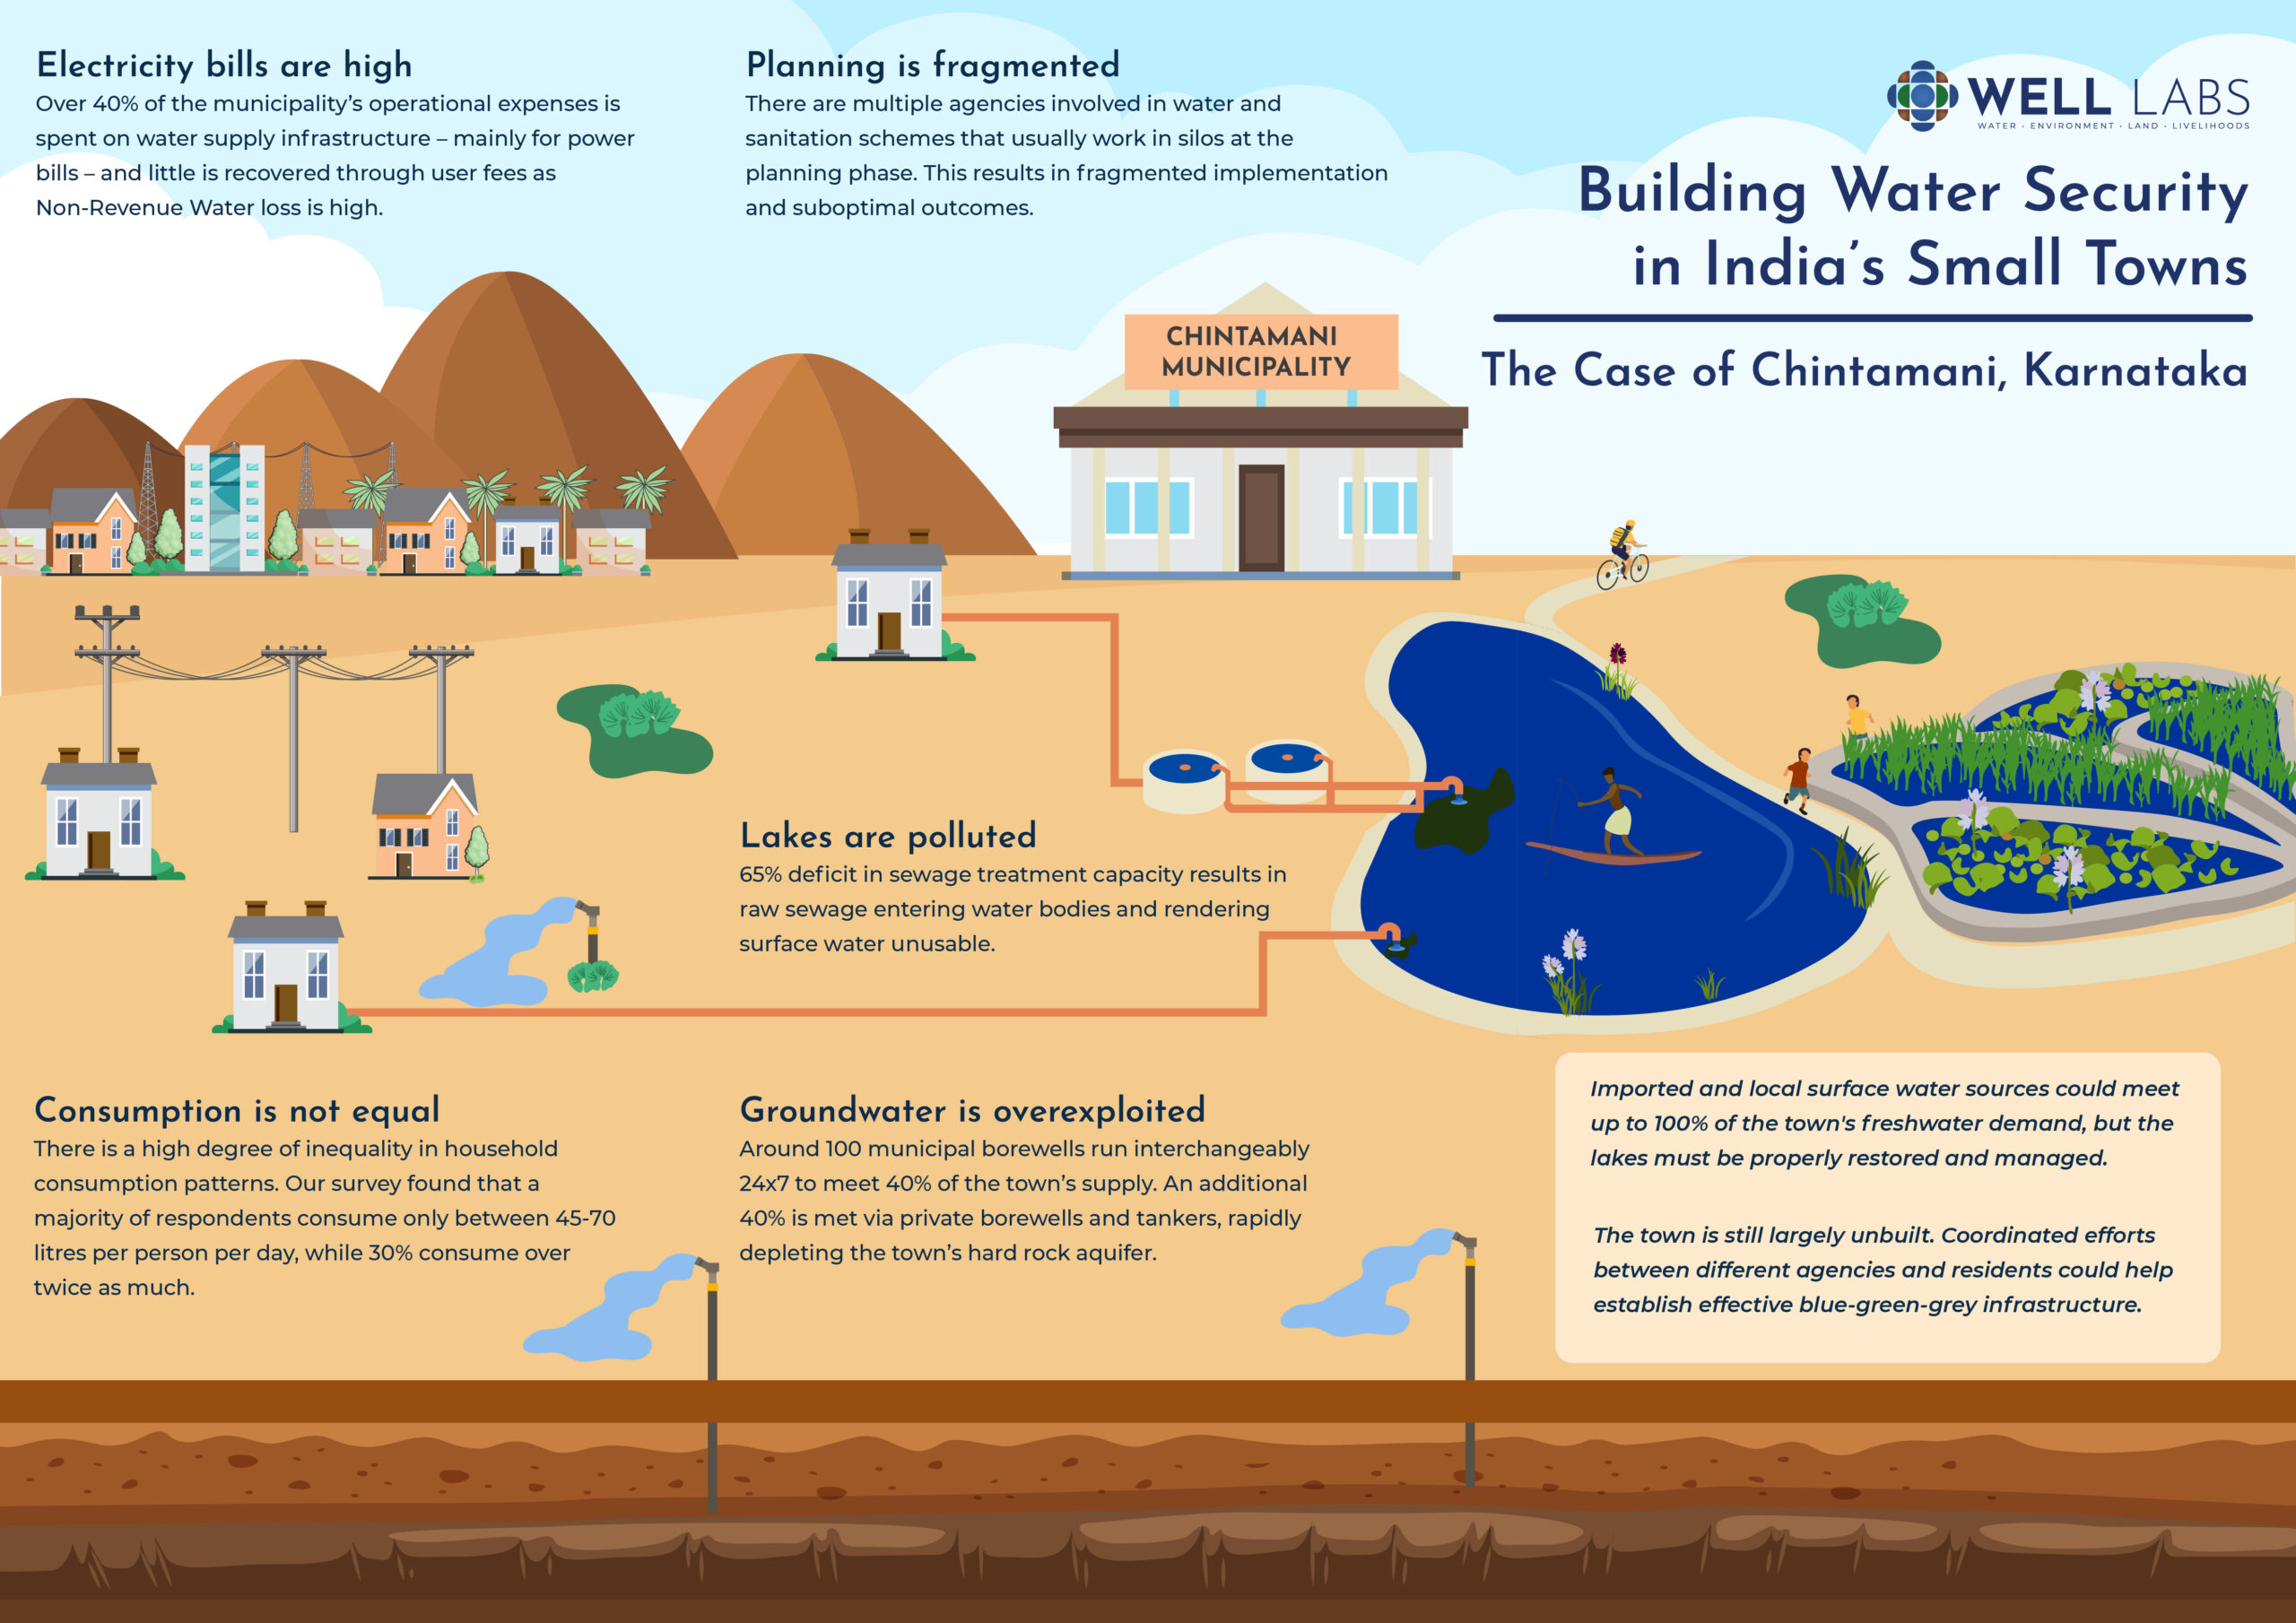 Illustrating depicting water insecurity in Chintamani small town.